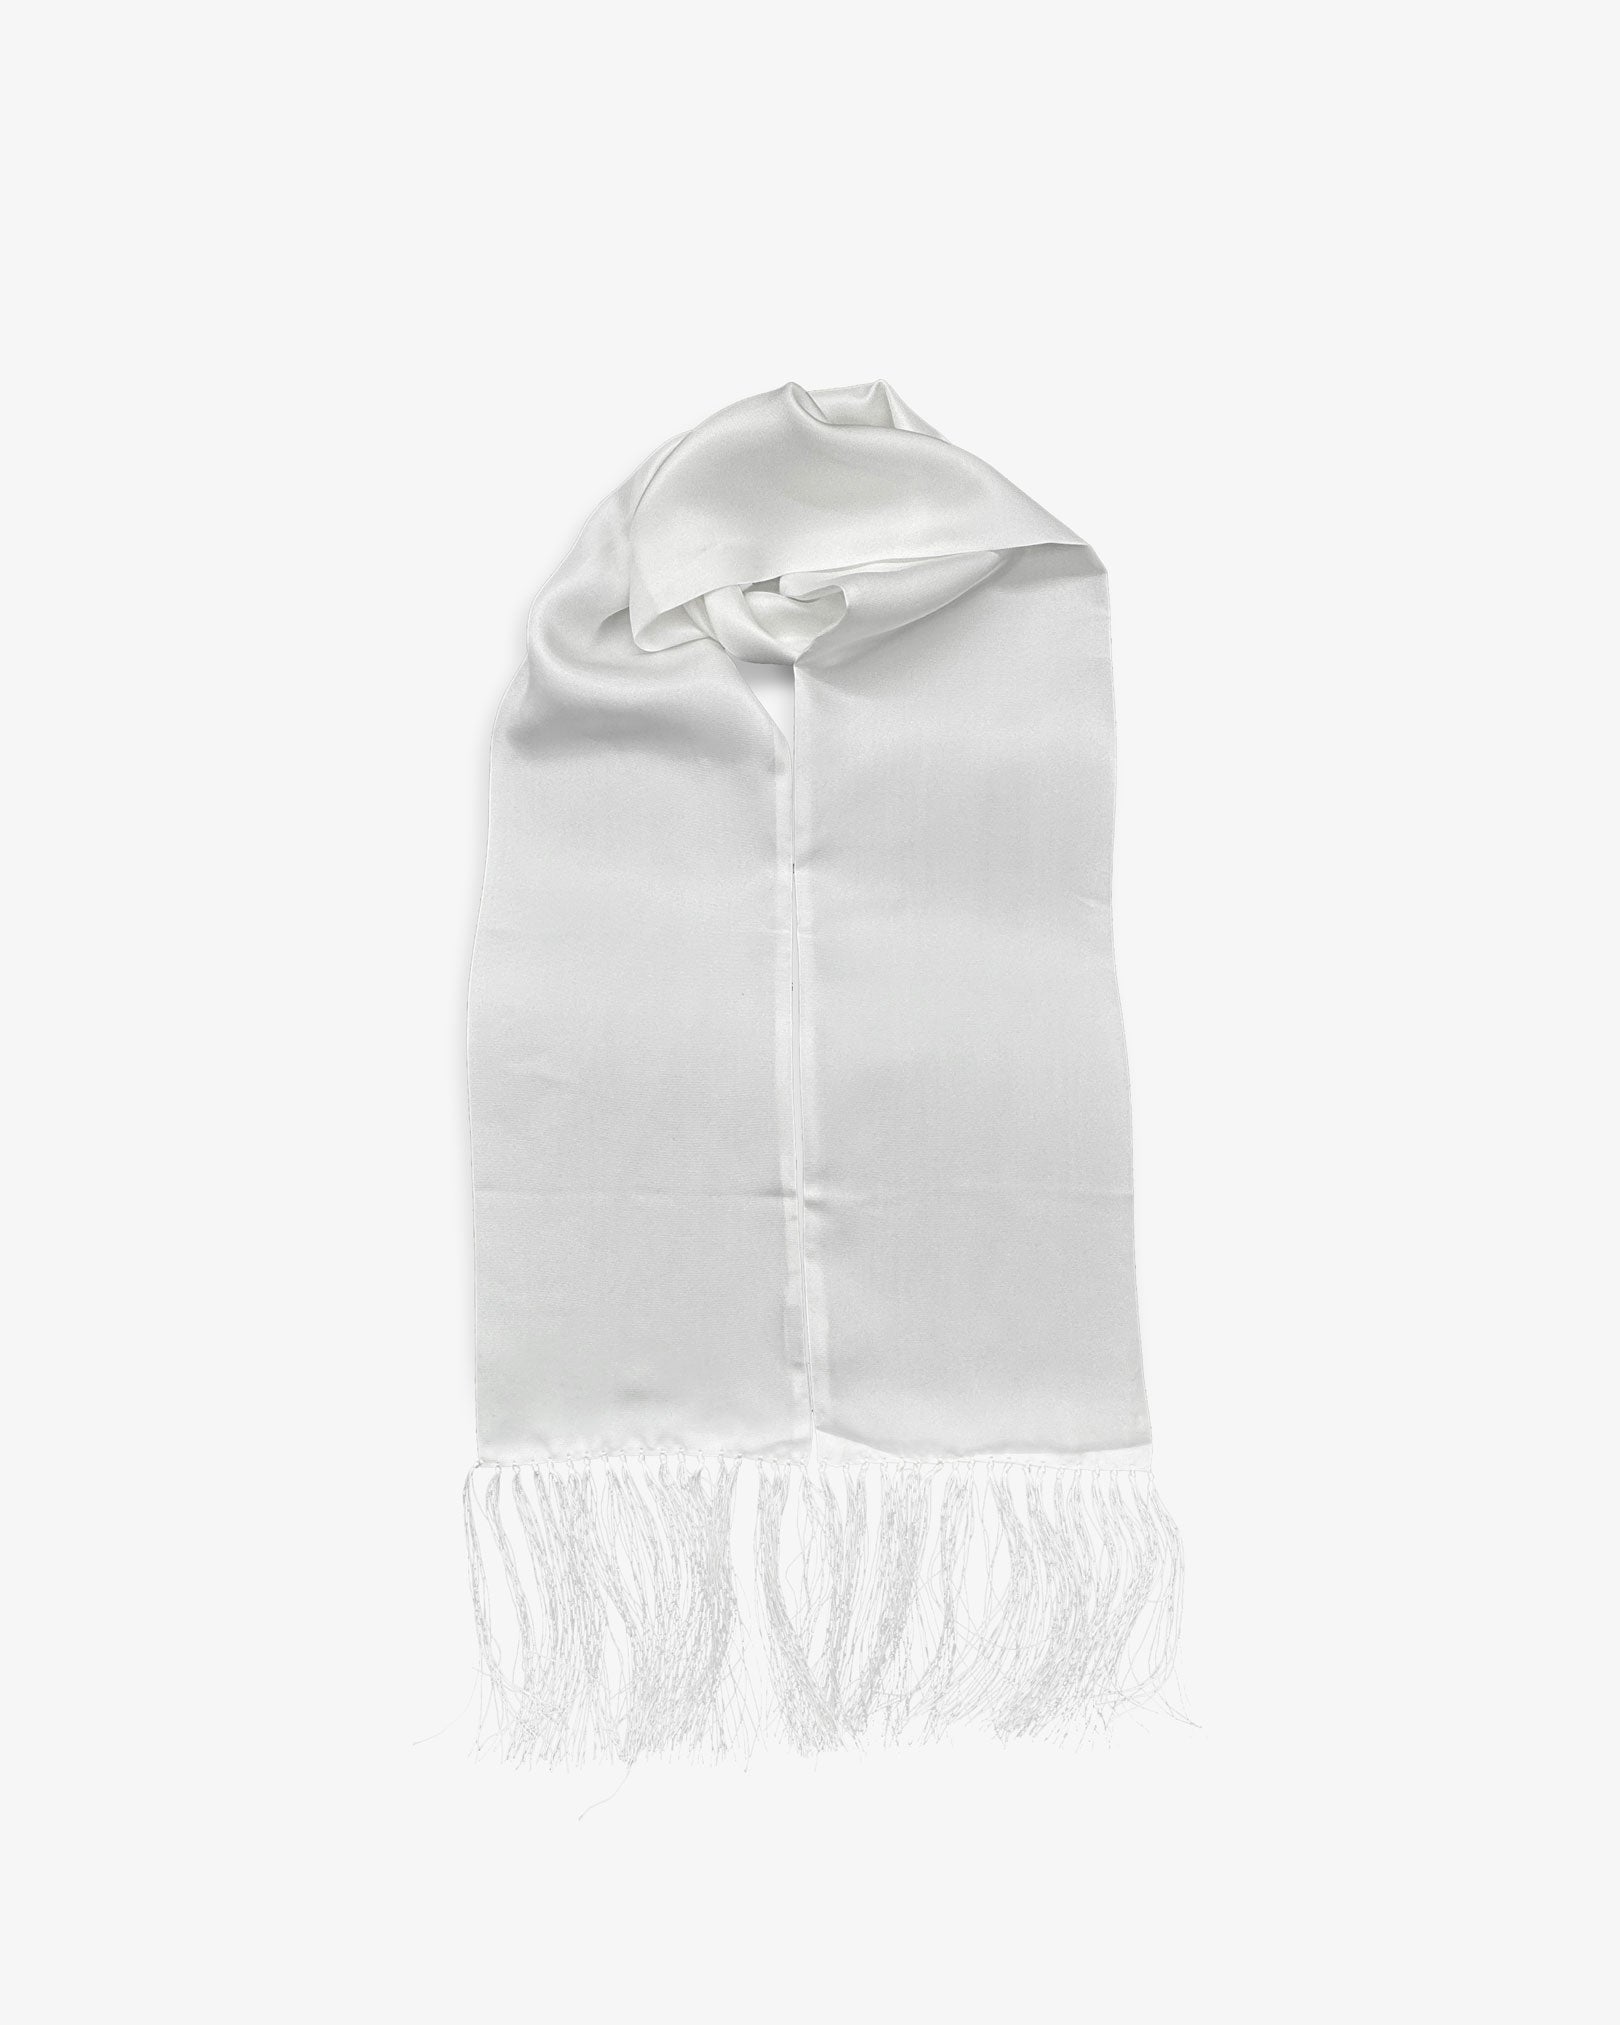 Looped view of the 'Air White' silk aviator scarf, clearly showing the white scarf and matching 3-inch fringe.